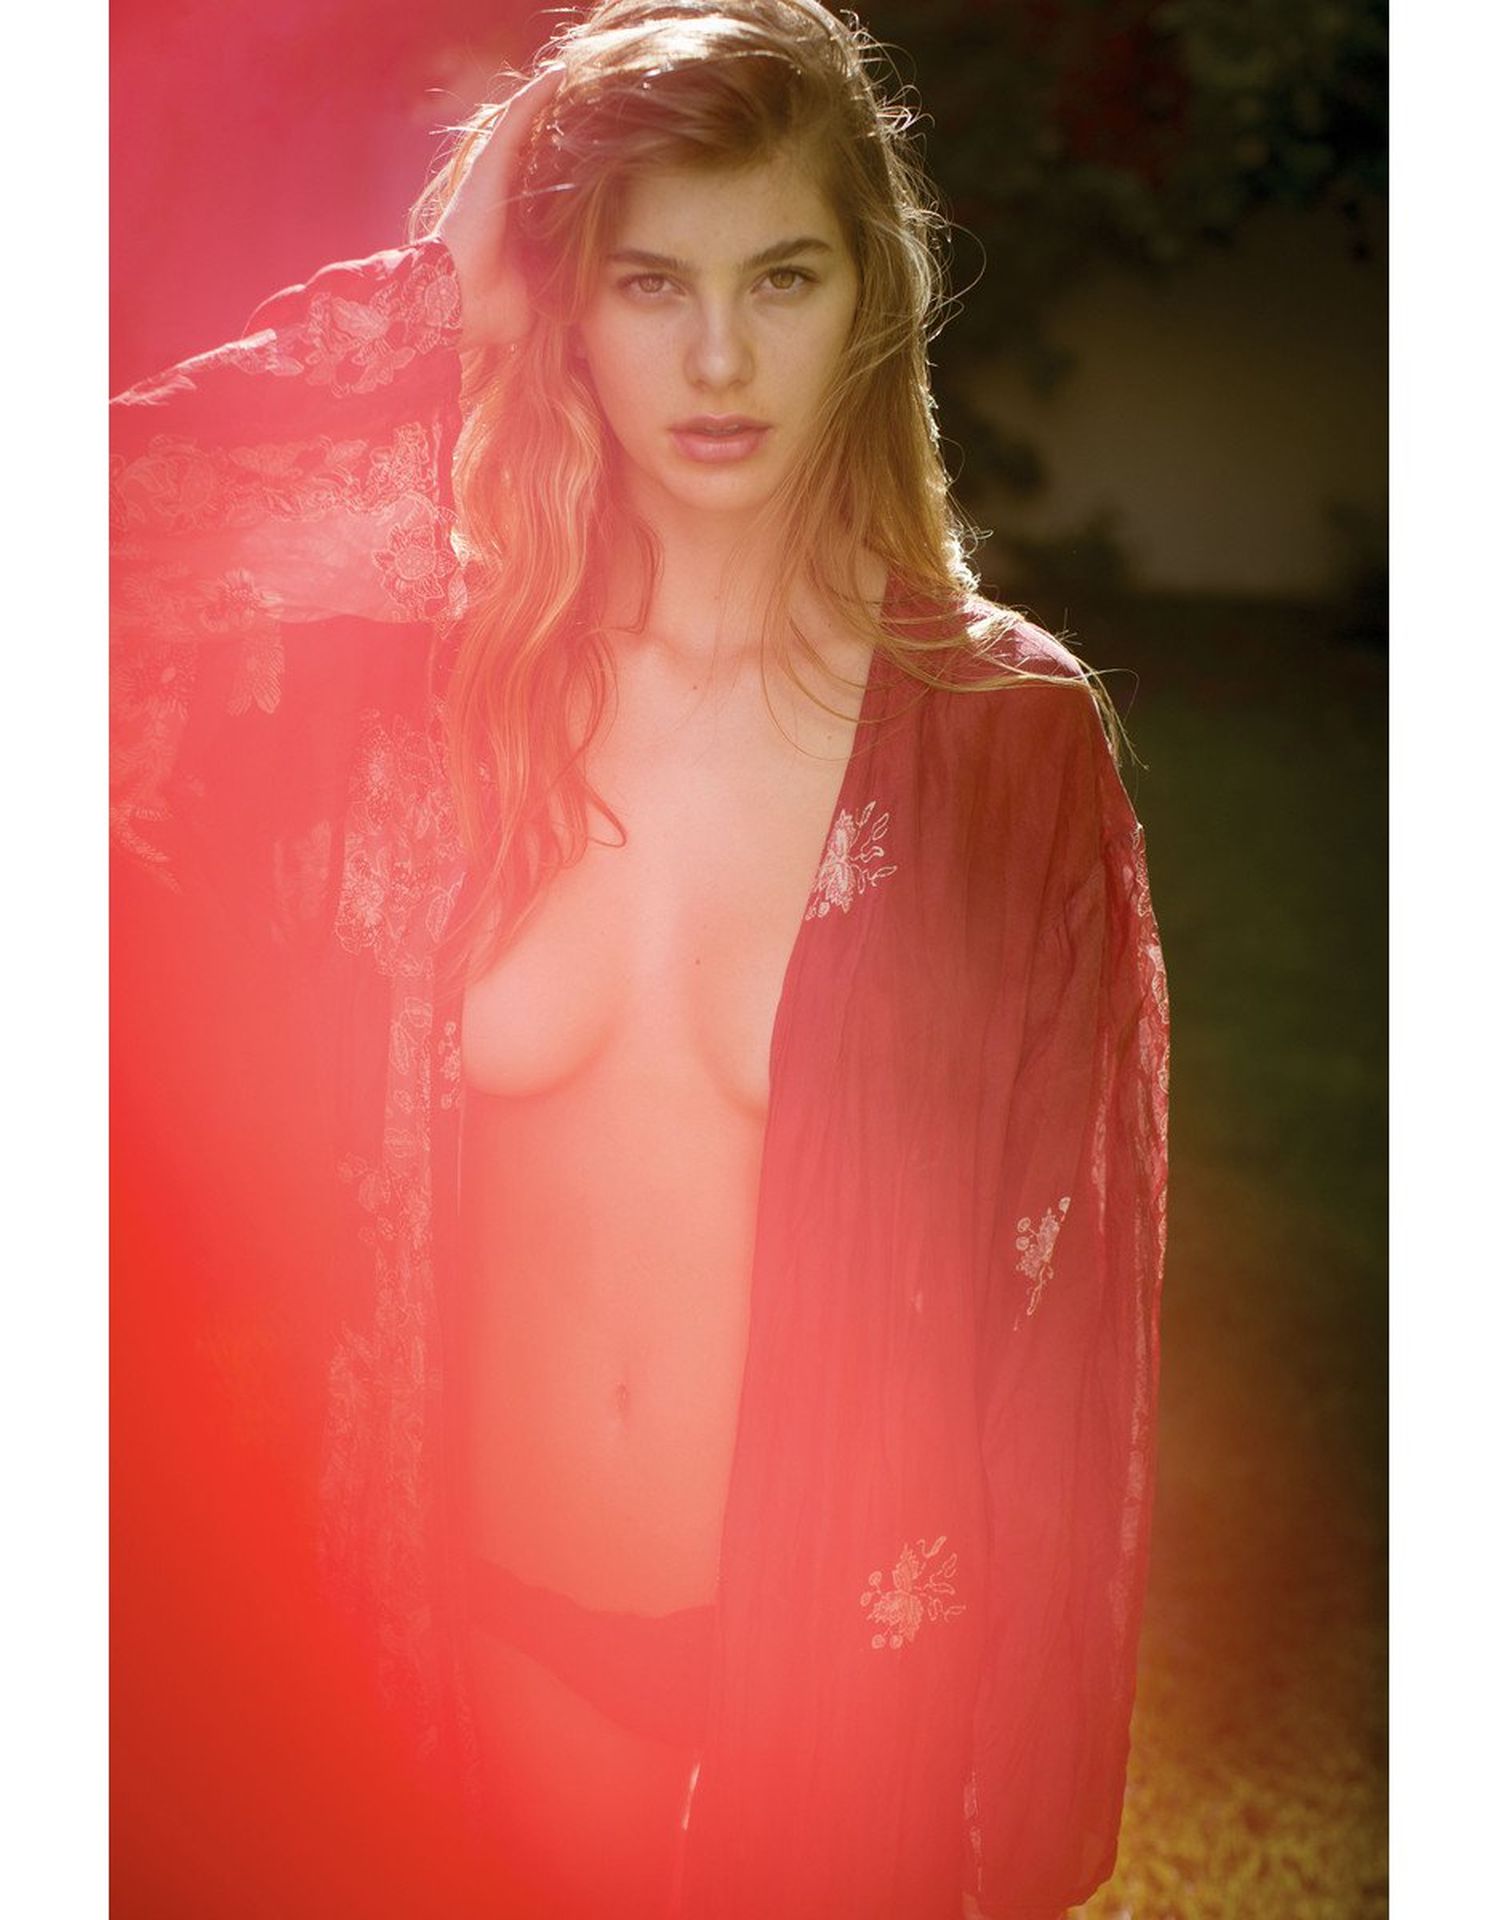 Here are the sexy/non-nude photo collection of Camila Morrone by Randall Sl...